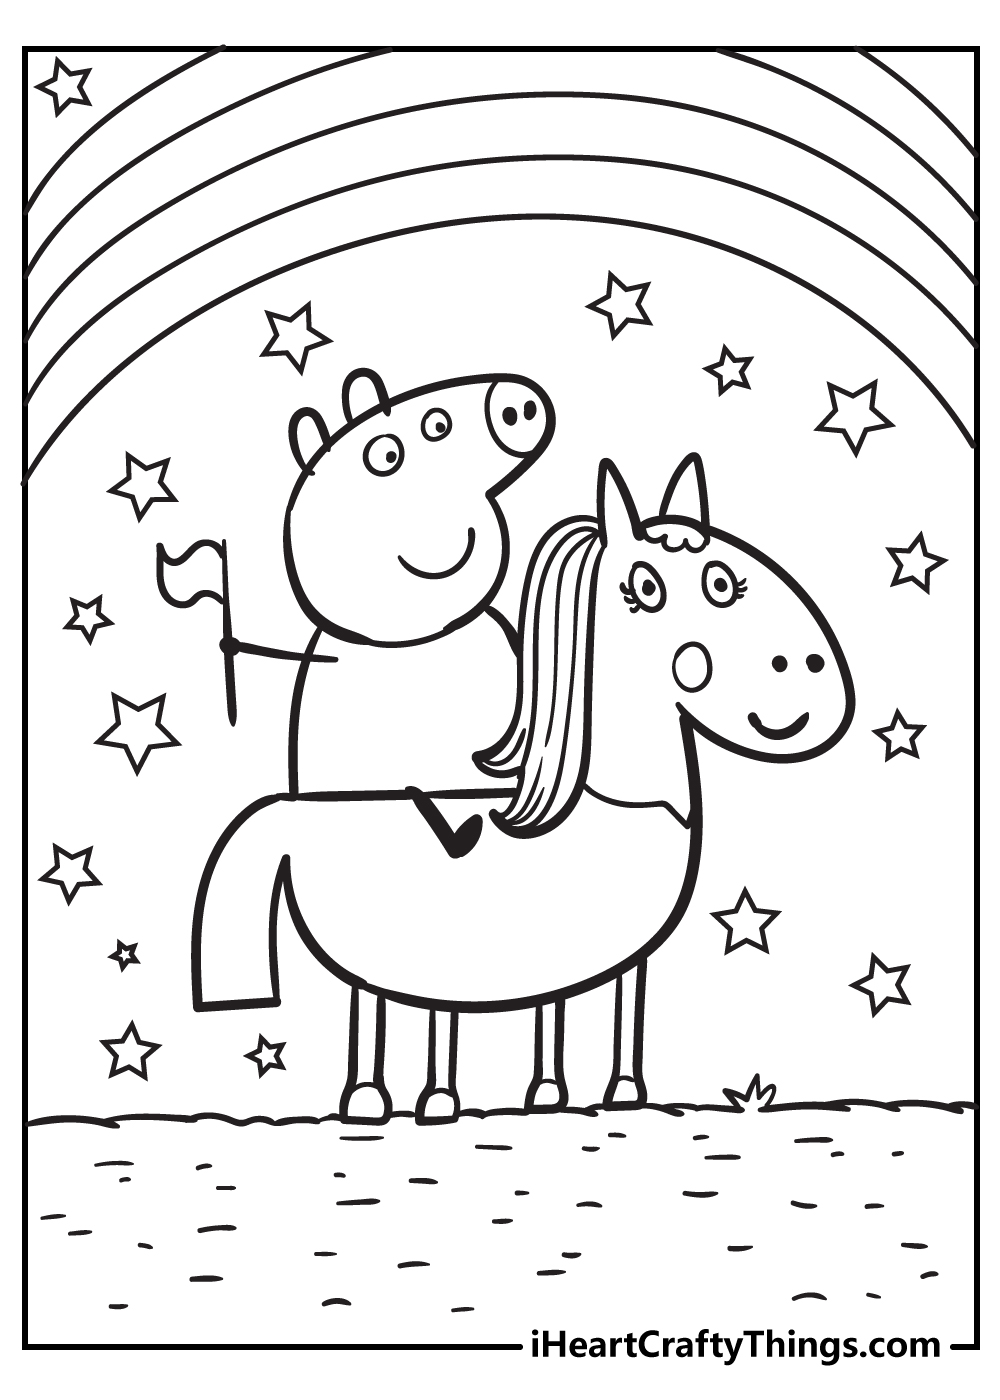 Peppa Pig coloring pages for adults free printable